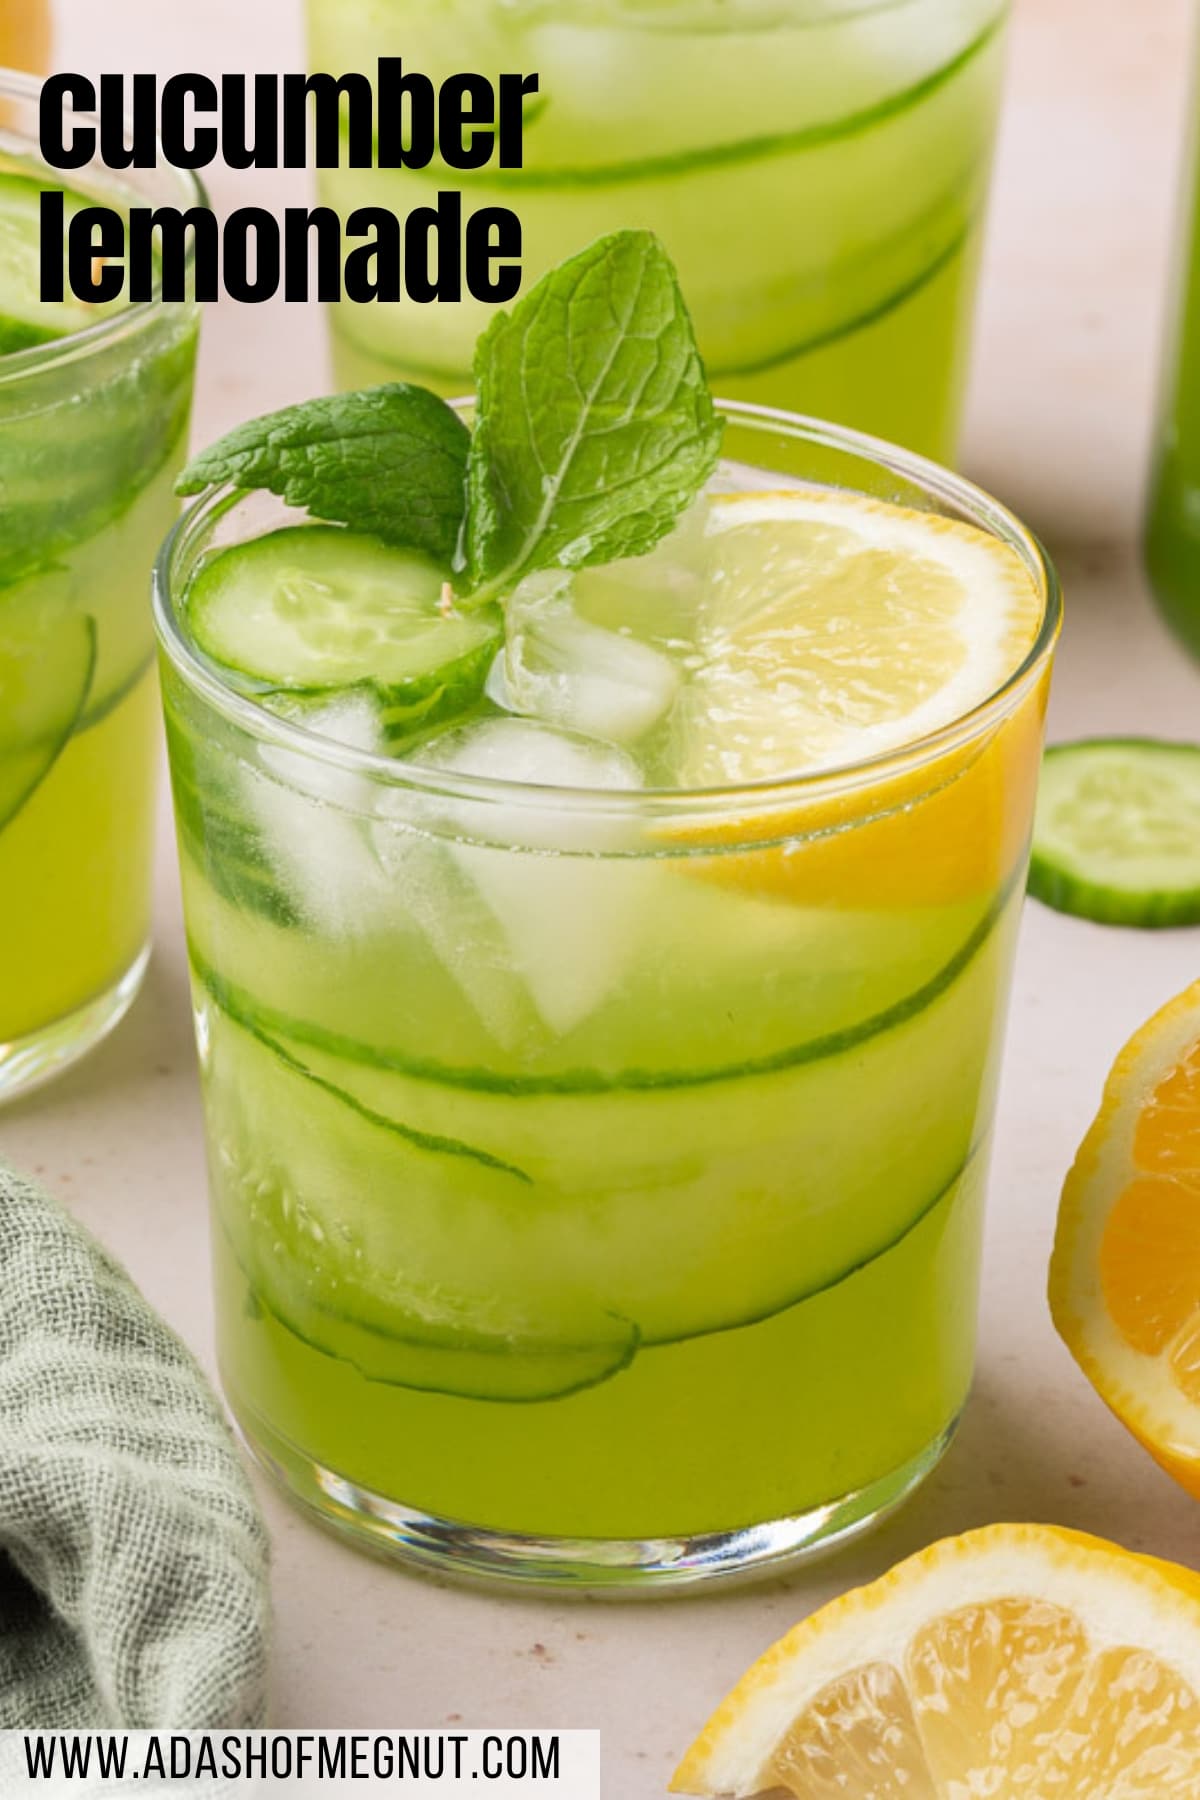 A glass of cucumber lemonade with fresh mint, ice cubes, lemon wedges, and cucumber ribbons.